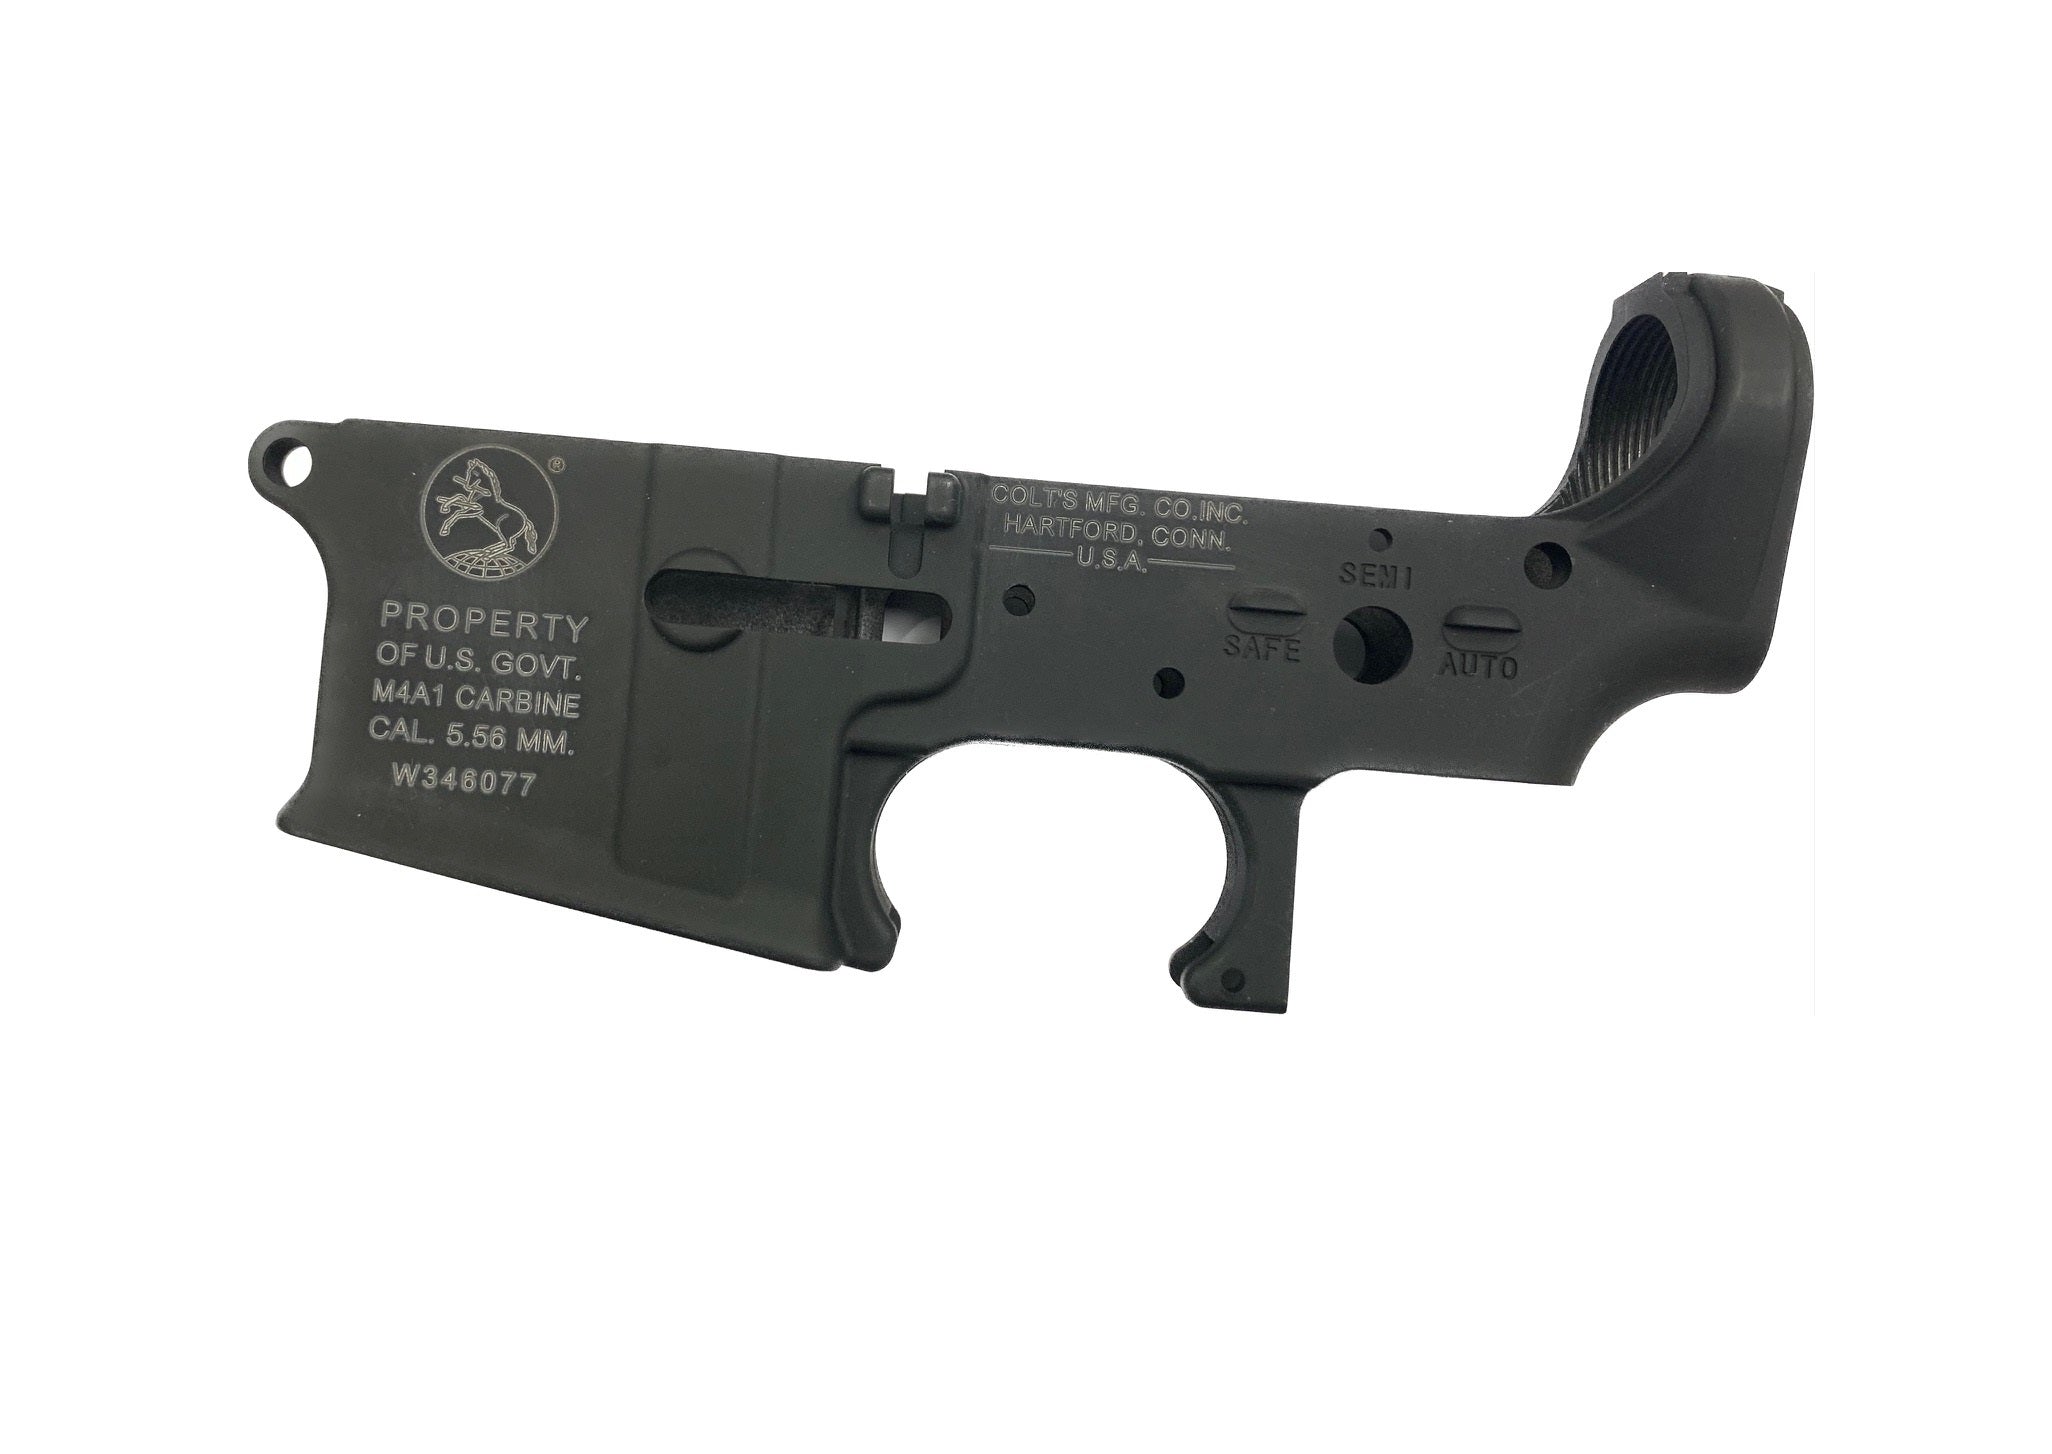 Lower Receiver - With Marking For KSC M4A1 (Ver. 1) GBBR